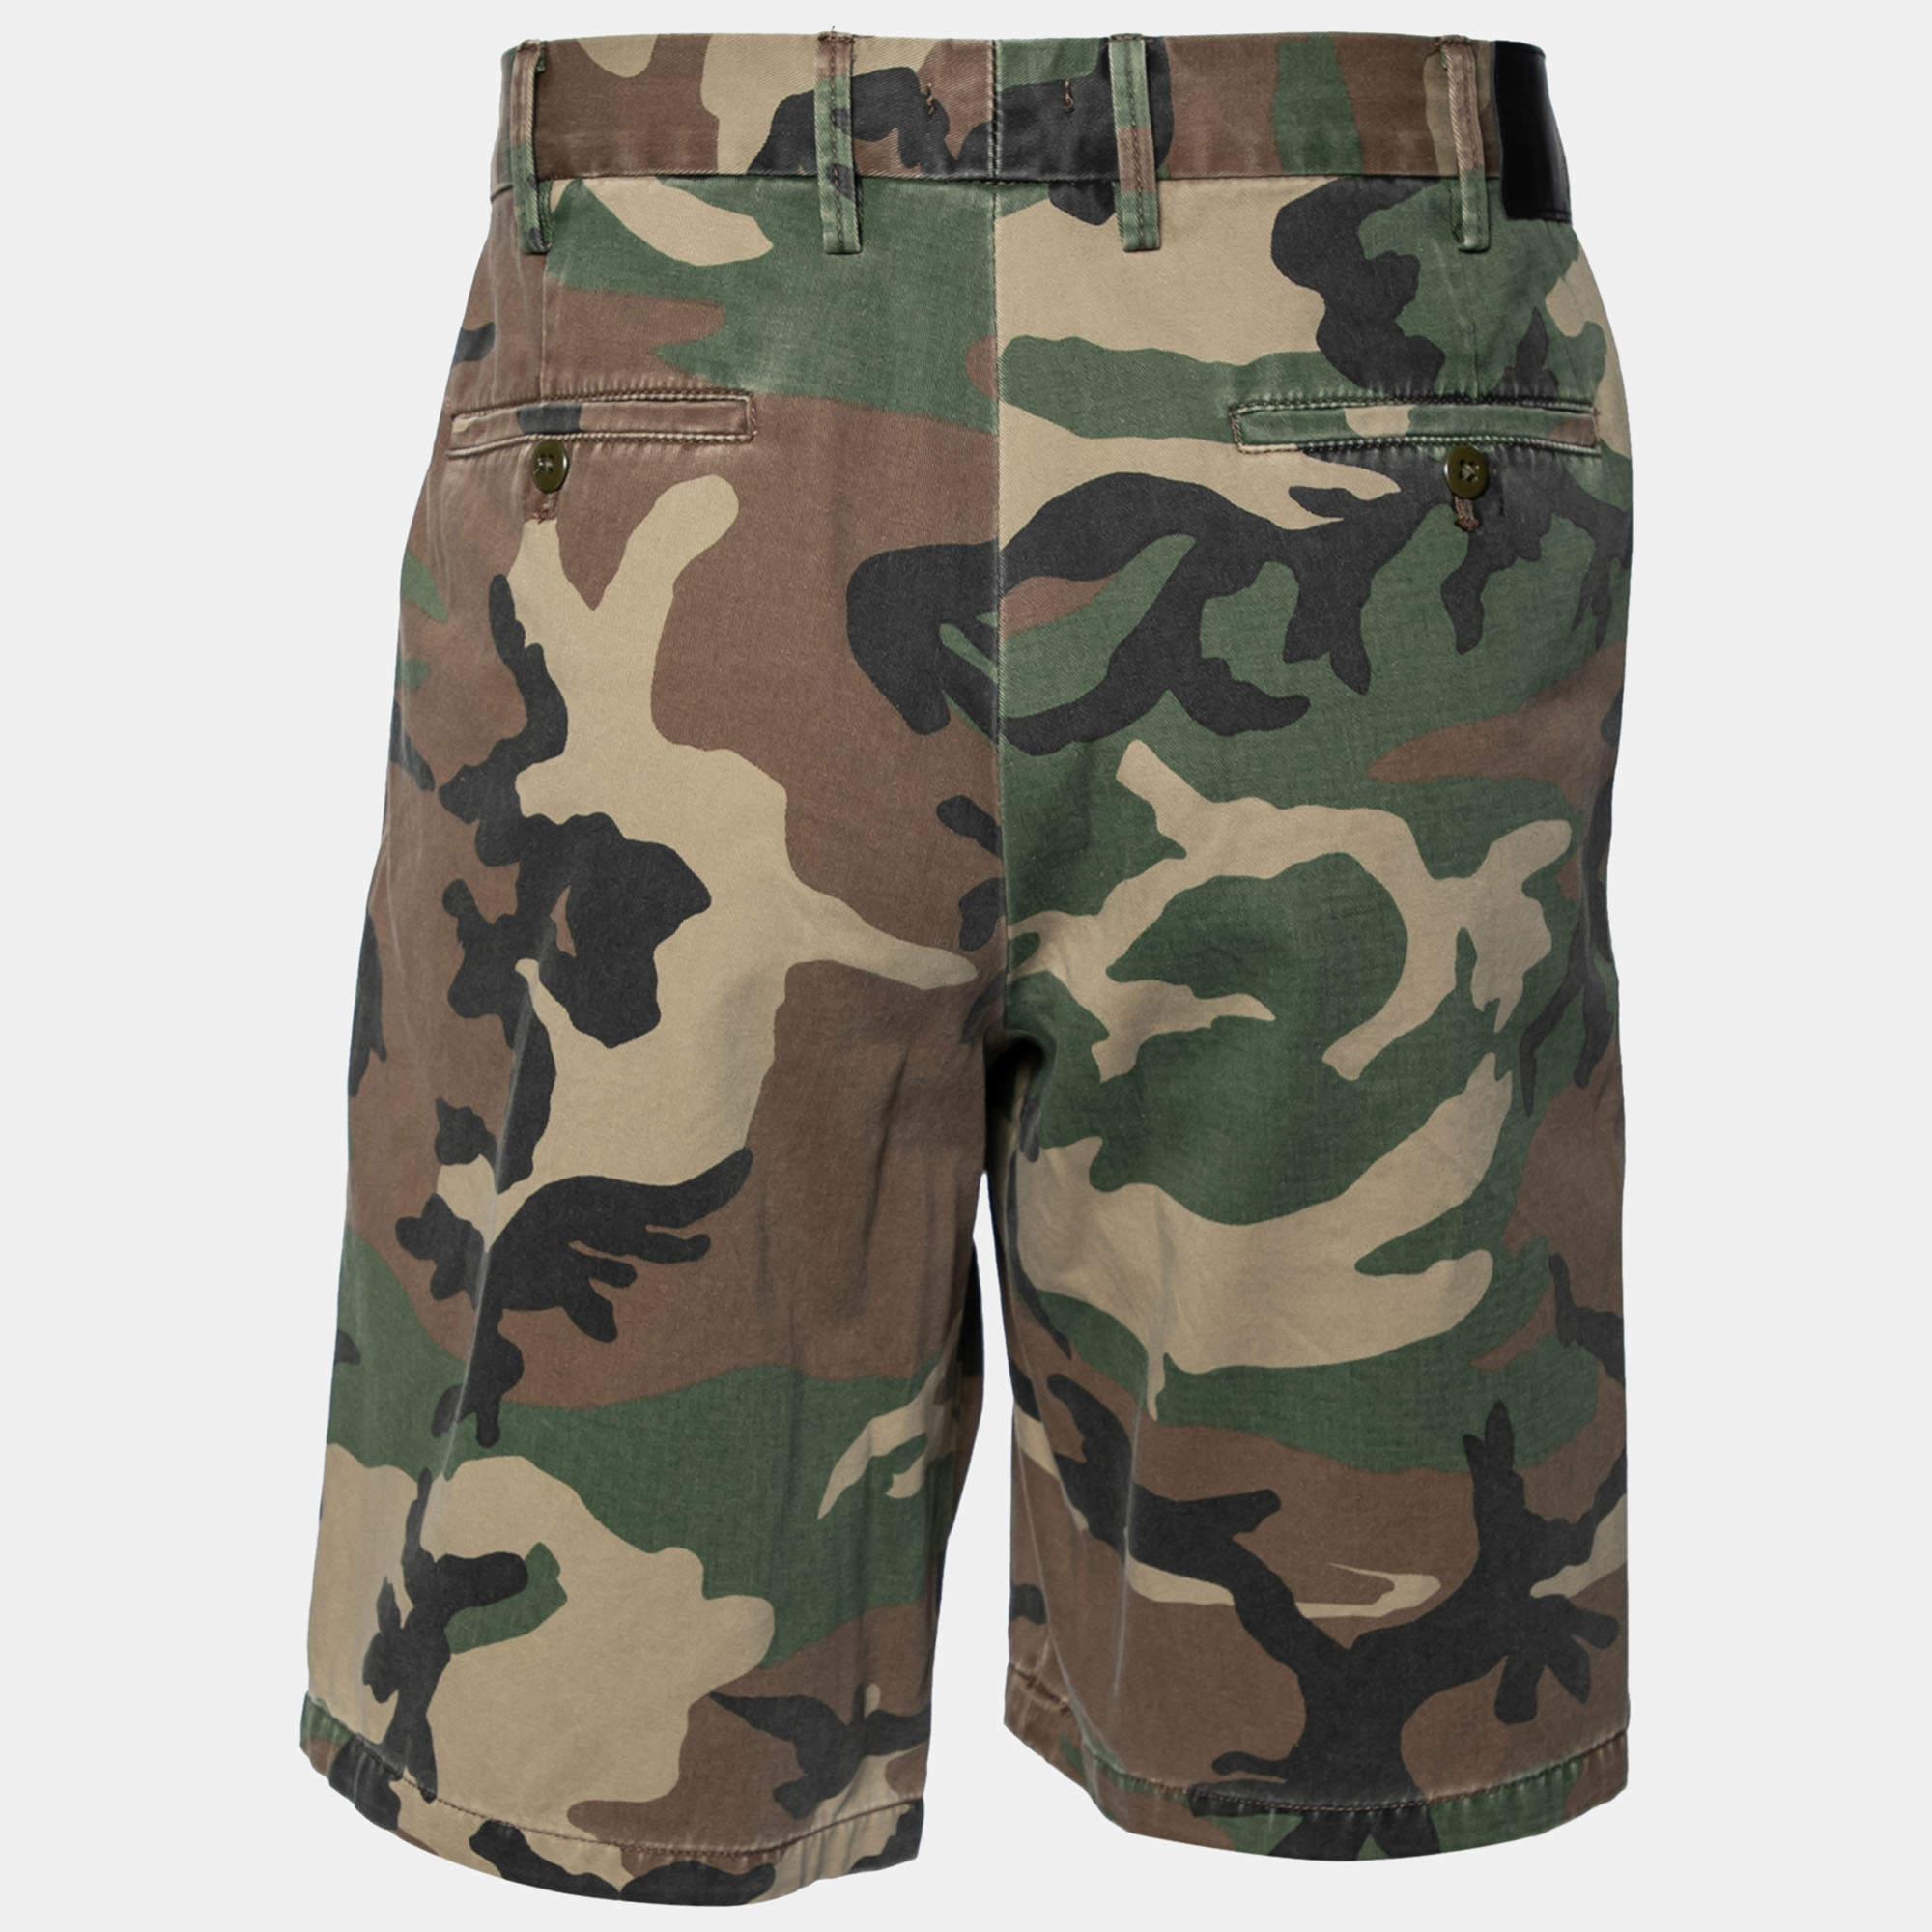 Whether you want to just lounge around, or go out to run errands, these R13 basketball shorts will be a stylish pick and will make you feel comfortable all day. It has been made using high-grade materials and the creation will go well with sneakers